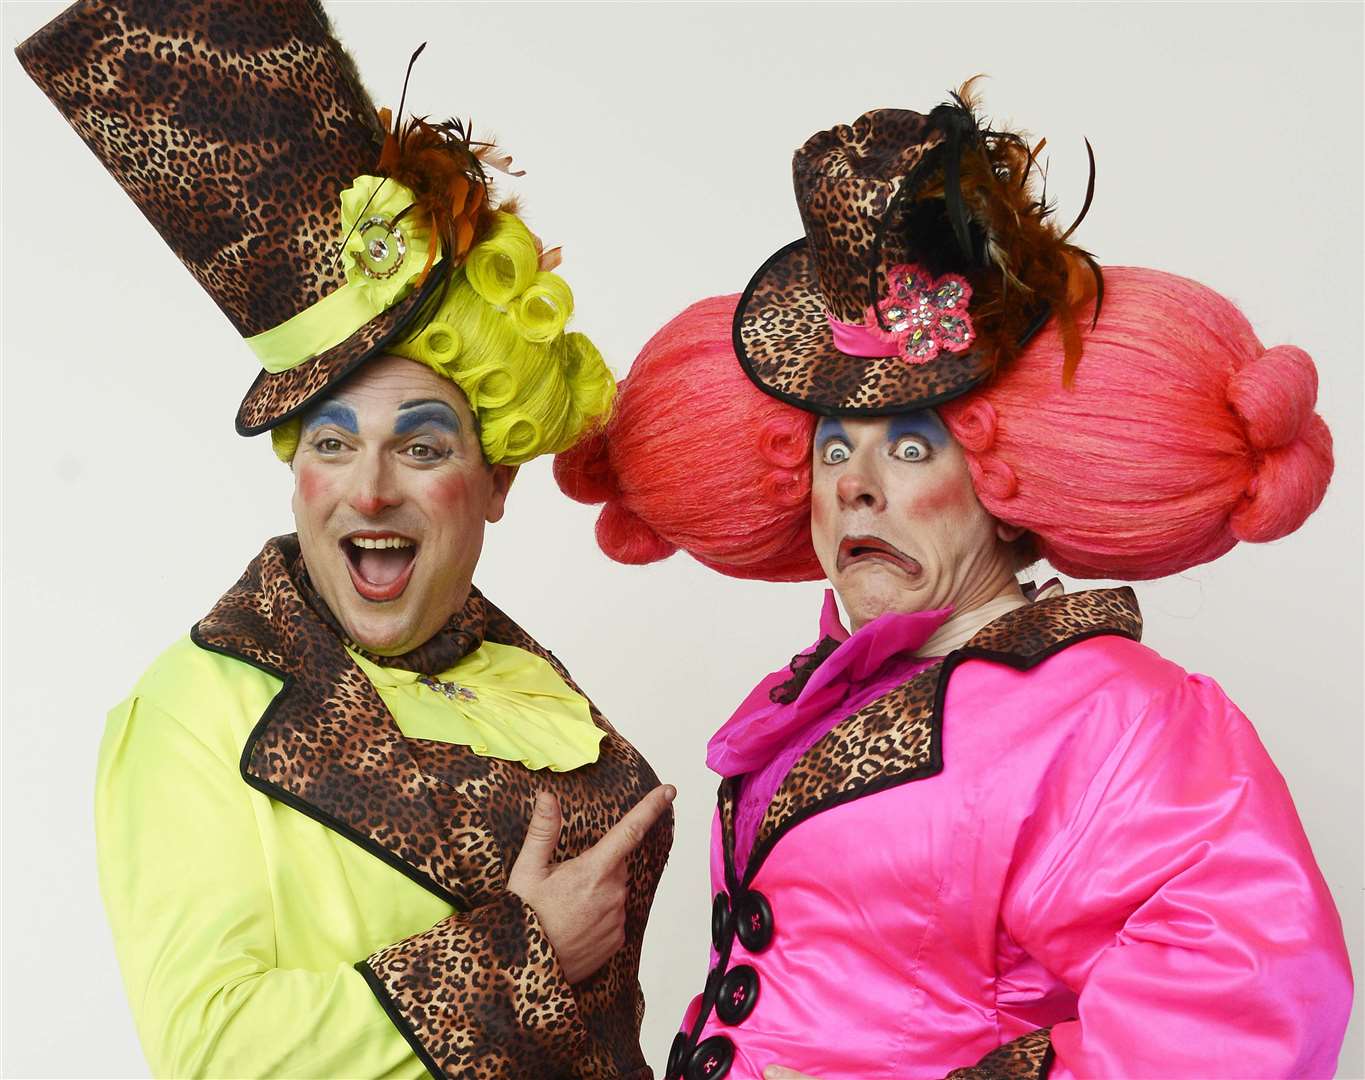 Ben Roddy and Lloyd Hollett are back in this year's Marlowe Theatre pantomime